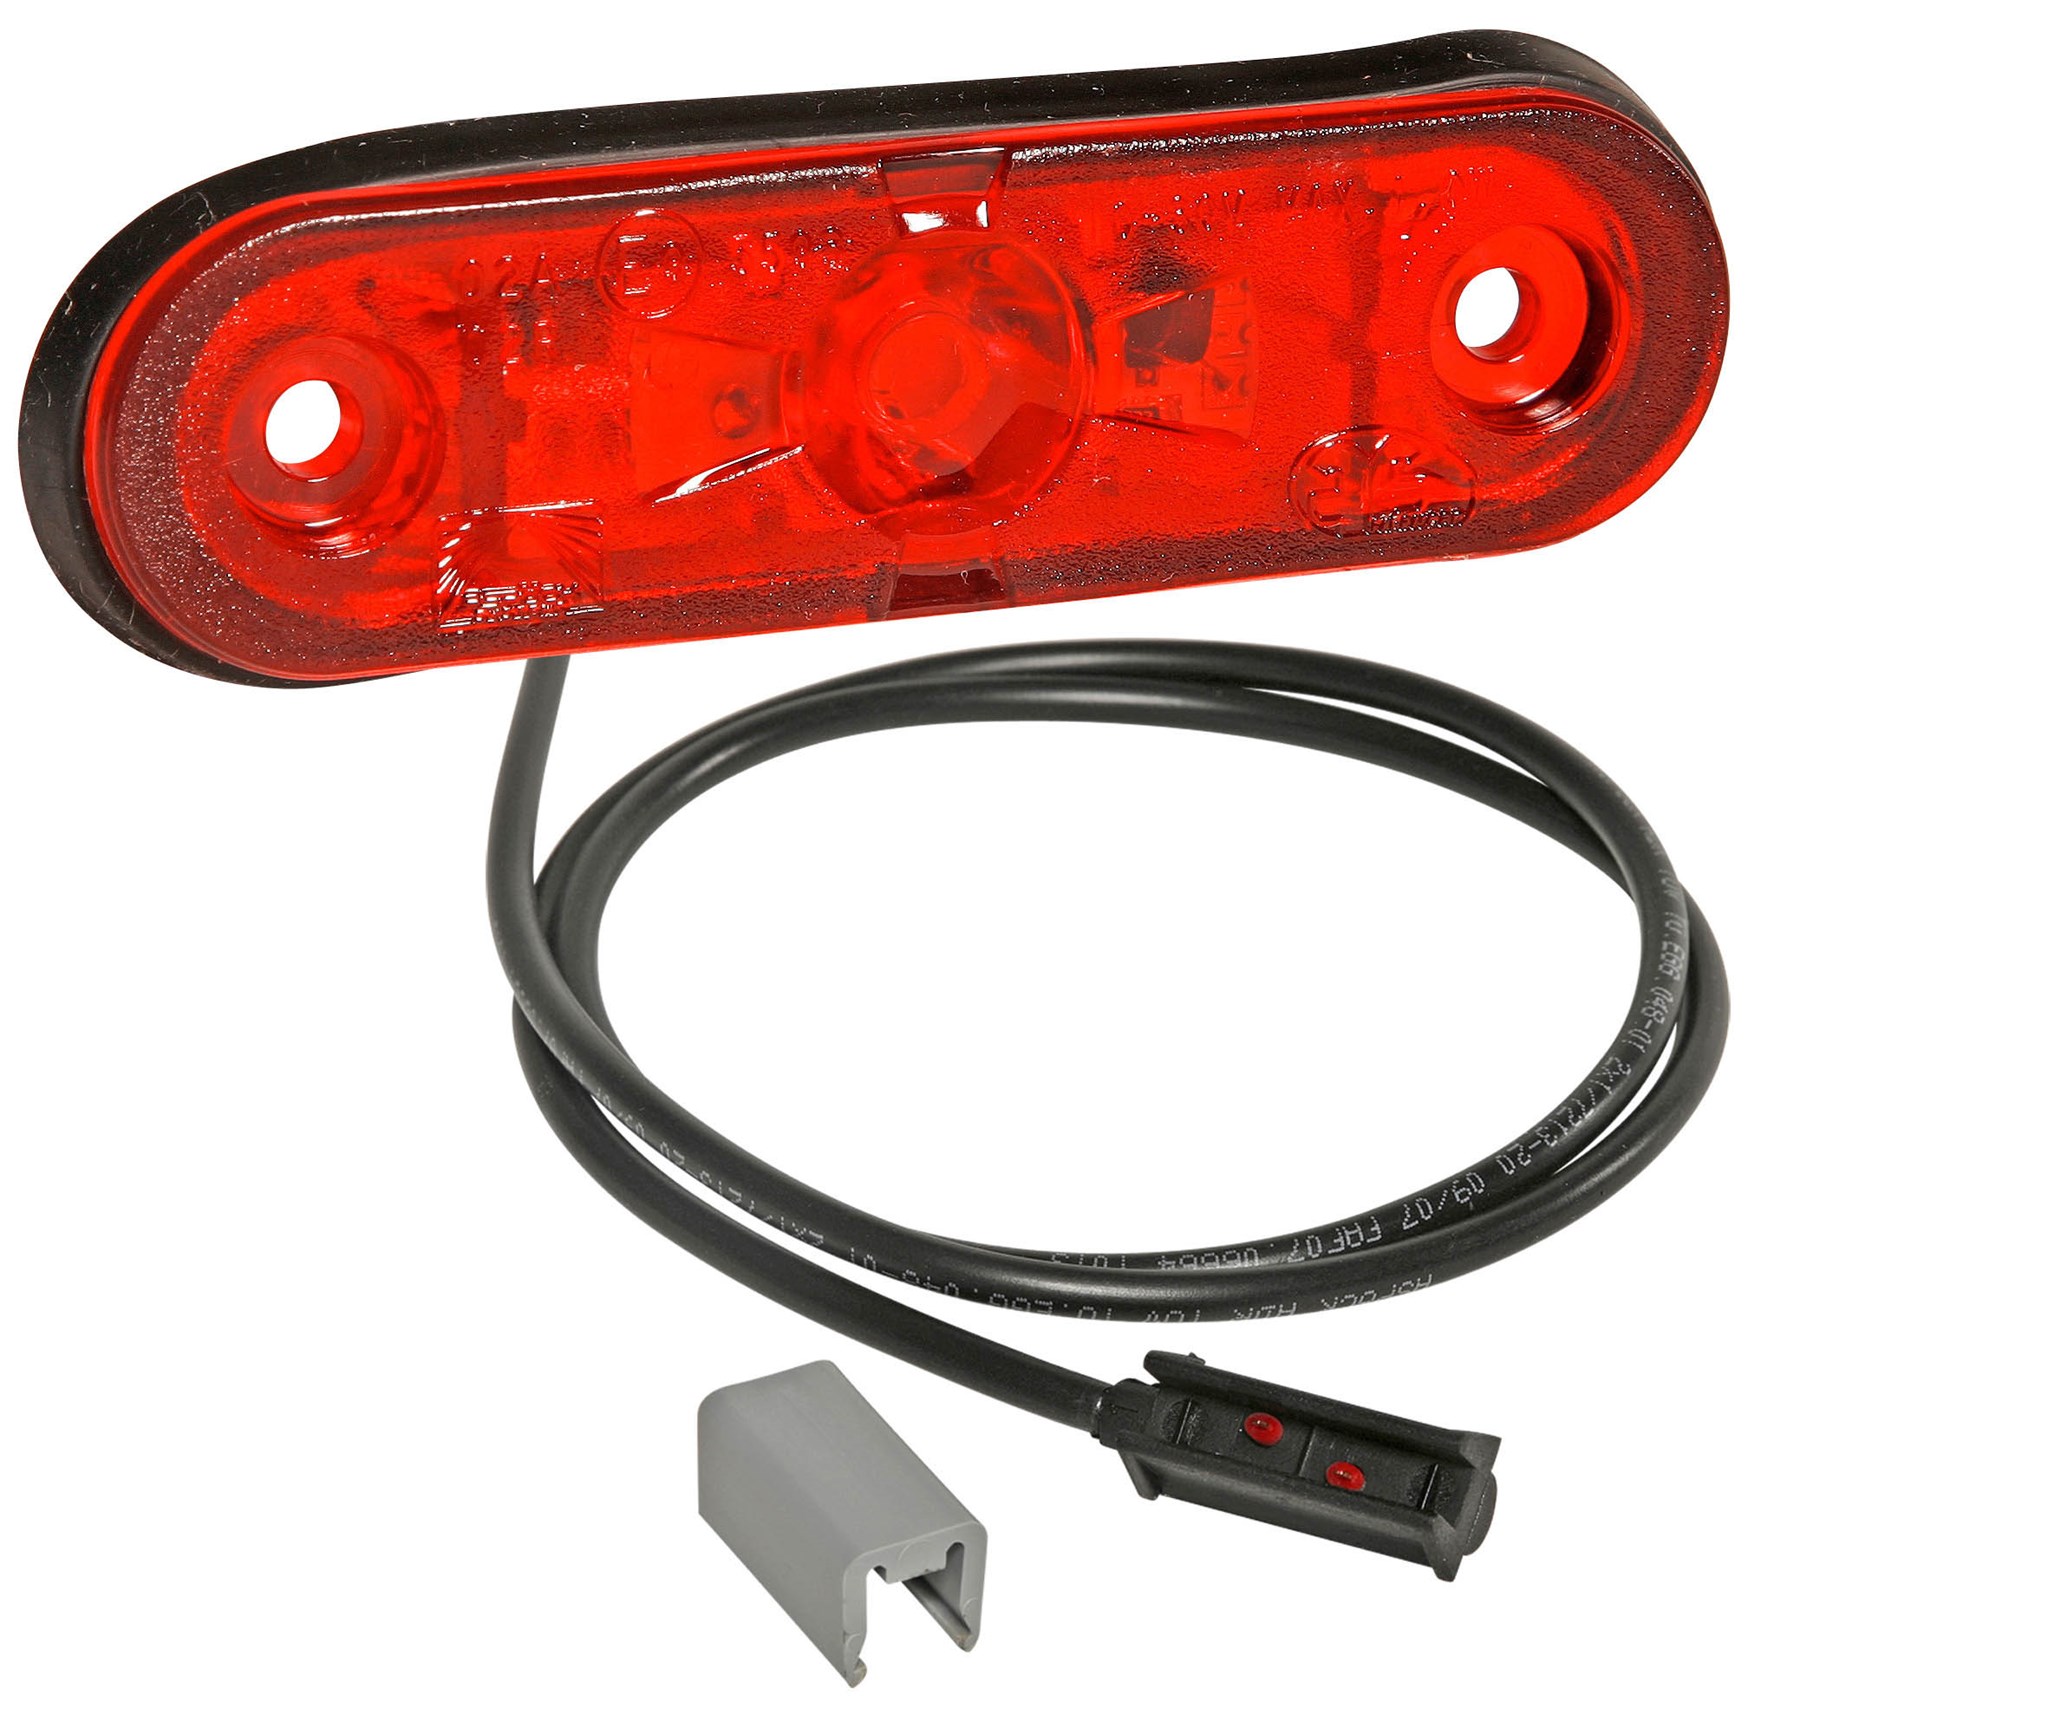 Picture of Positionsleuchte 31-7204-017 Aspöck Posipoint II rot LED P&R 1500mm